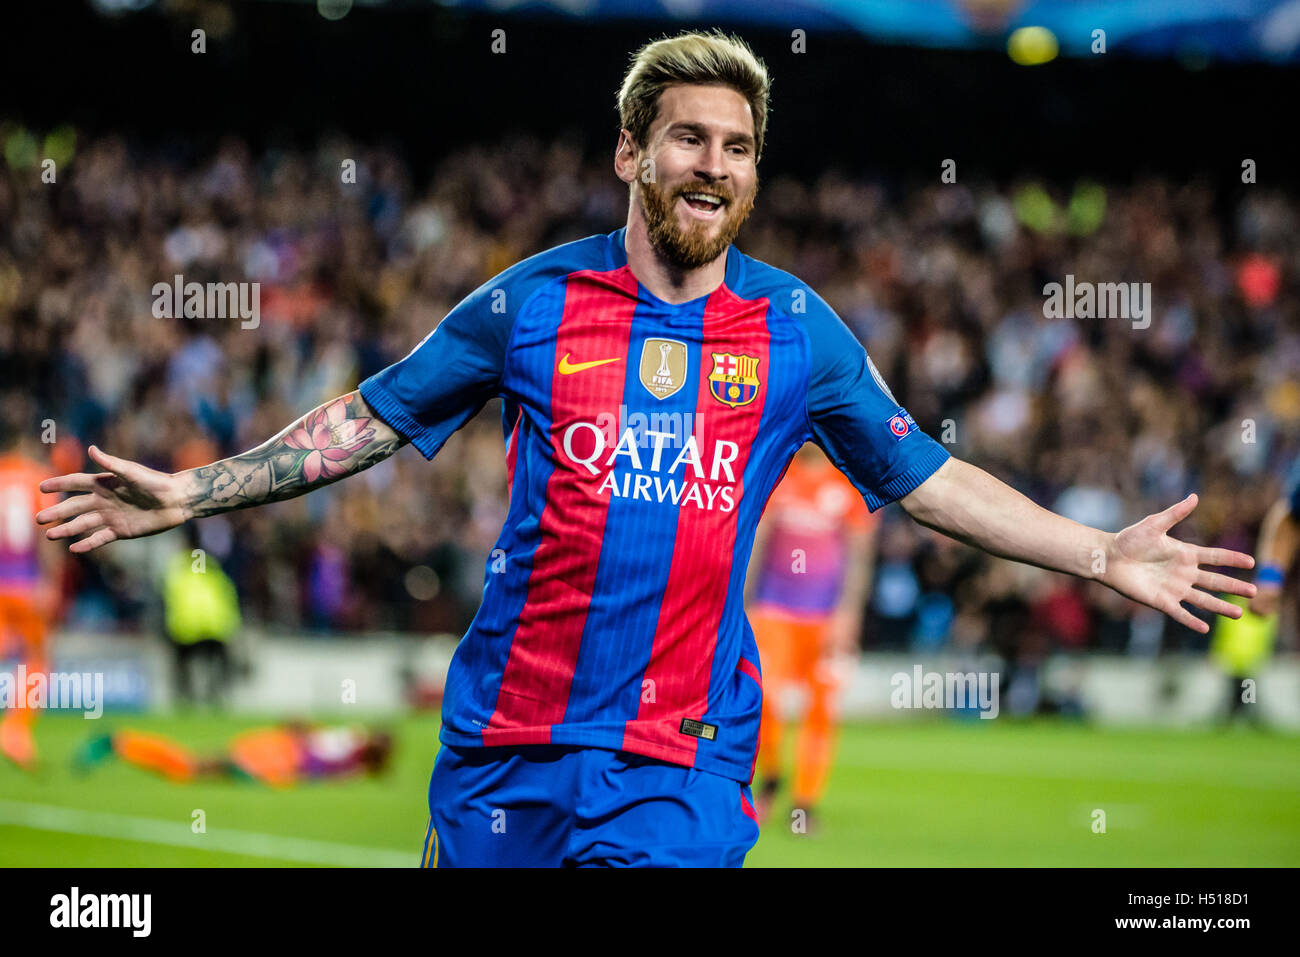 Barcelona, Catalonia, Spain. 19th Oct, 2016. FC Barcelona forward MESSI celebrates his goal during the Champions League match between FC Barcelona and Manchester City at the Camp Nou stadium in Barcelona Credit:  Matthias Oesterle/ZUMA Wire/Alamy Live News Stock Photo